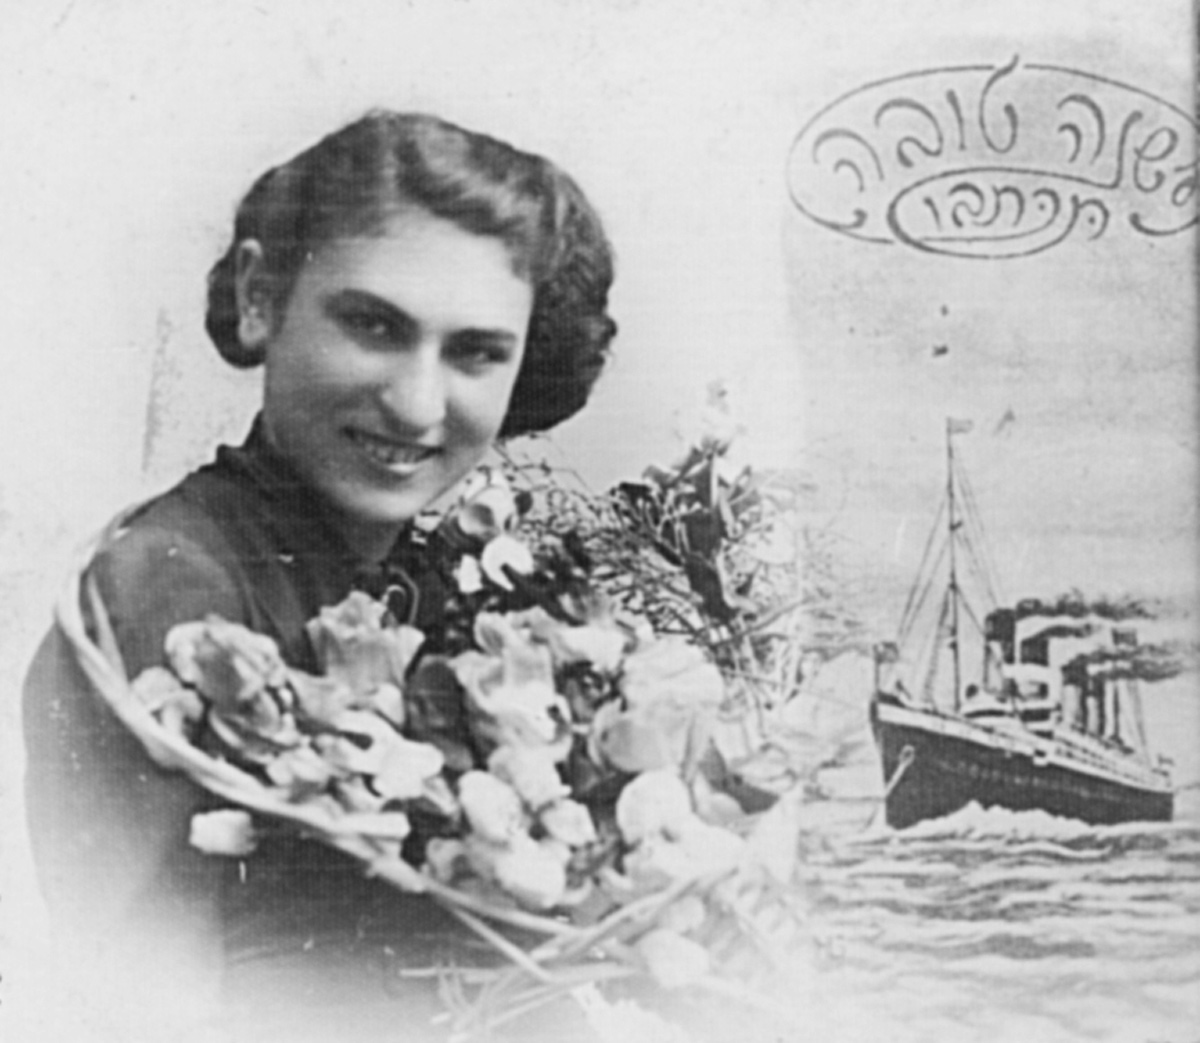 "Shana Tova" (Happy New Year) card with a portrait of Henia Lubliner, which she sent from Siedlce, Poland to her sister Esther Herz (later Kramash-Knaani) in Eretz Israel (Mandatory Palestine) before the war